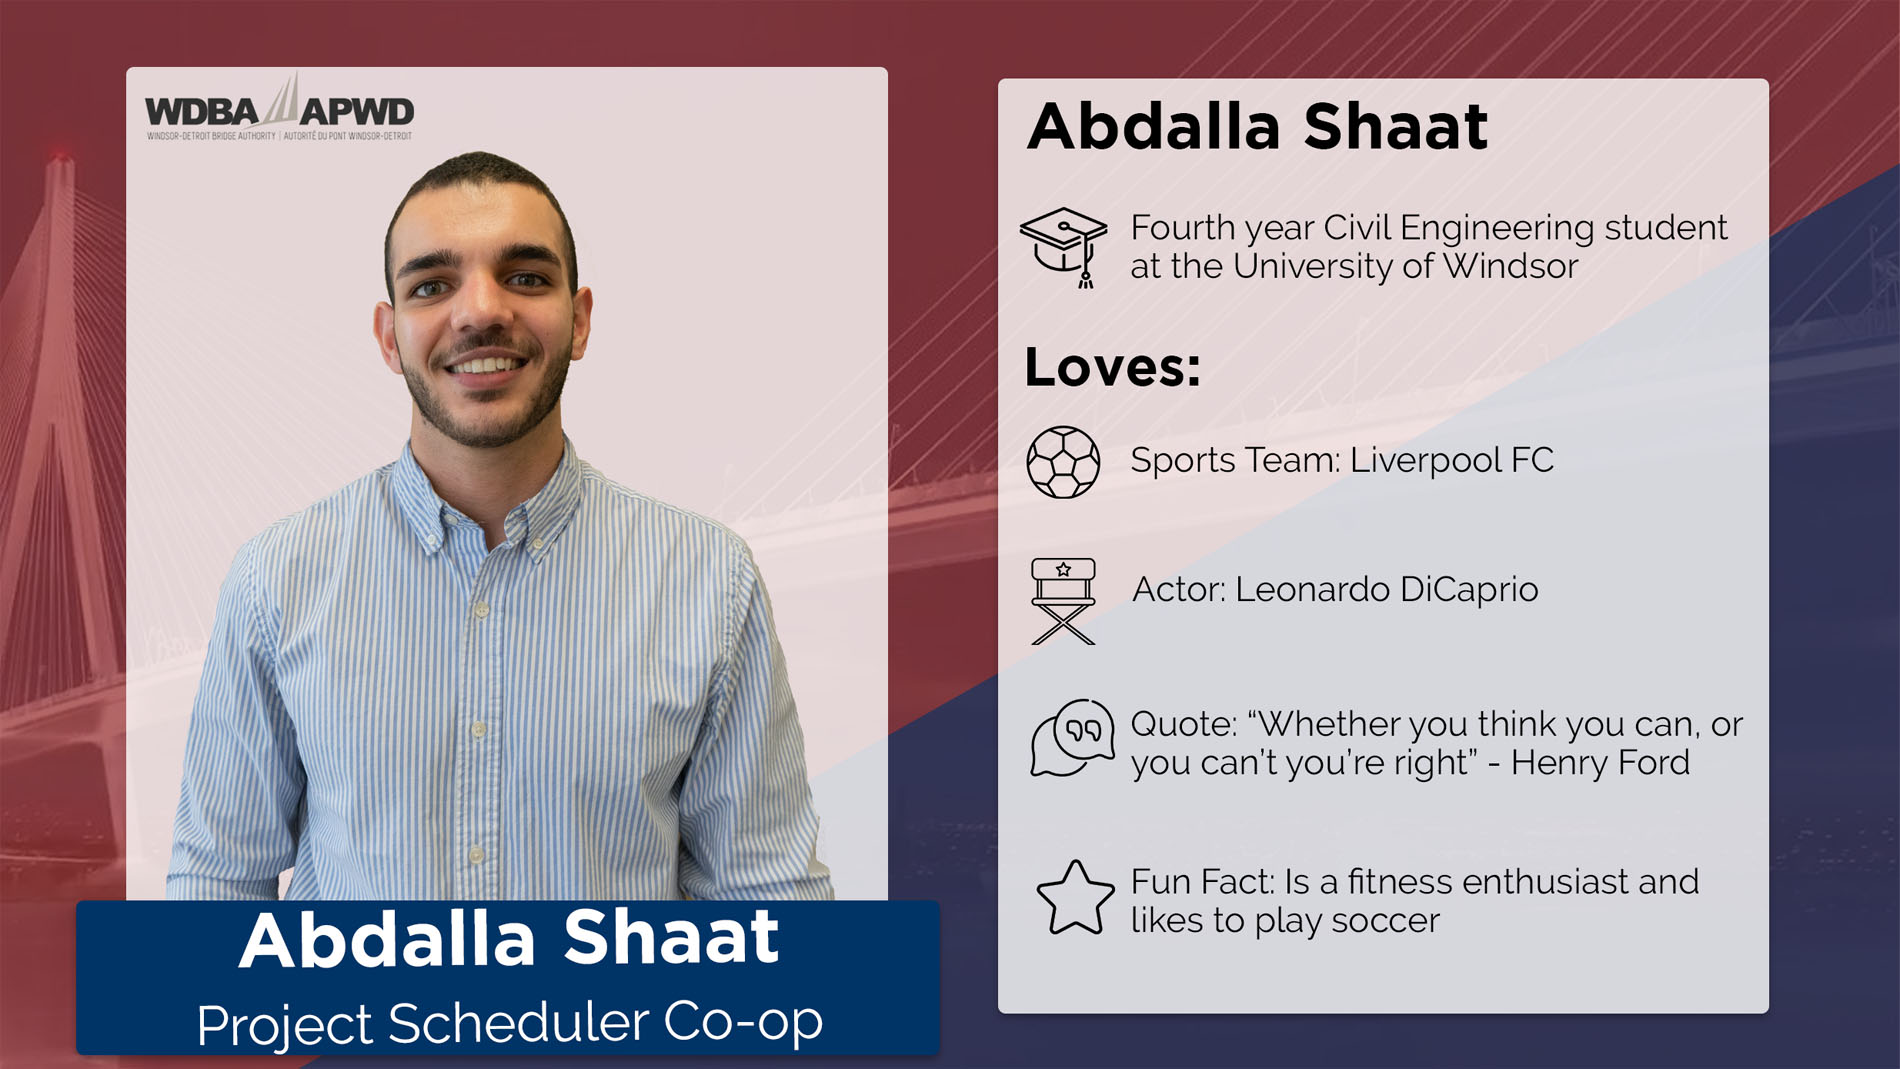 Abdallah Shaat, Project Scheduler Co-op. Fourth year Civil Engineering student at the University of Windsor. Favourite Sports Team: Liverpool FC. Favourite Actor: Leonardo DiCaprio. Quote: "Whether you think you can, or you can't, you're right" - Henry Ford. Fun Fact: Is a fitness enthusiast and likes to play soccer. 